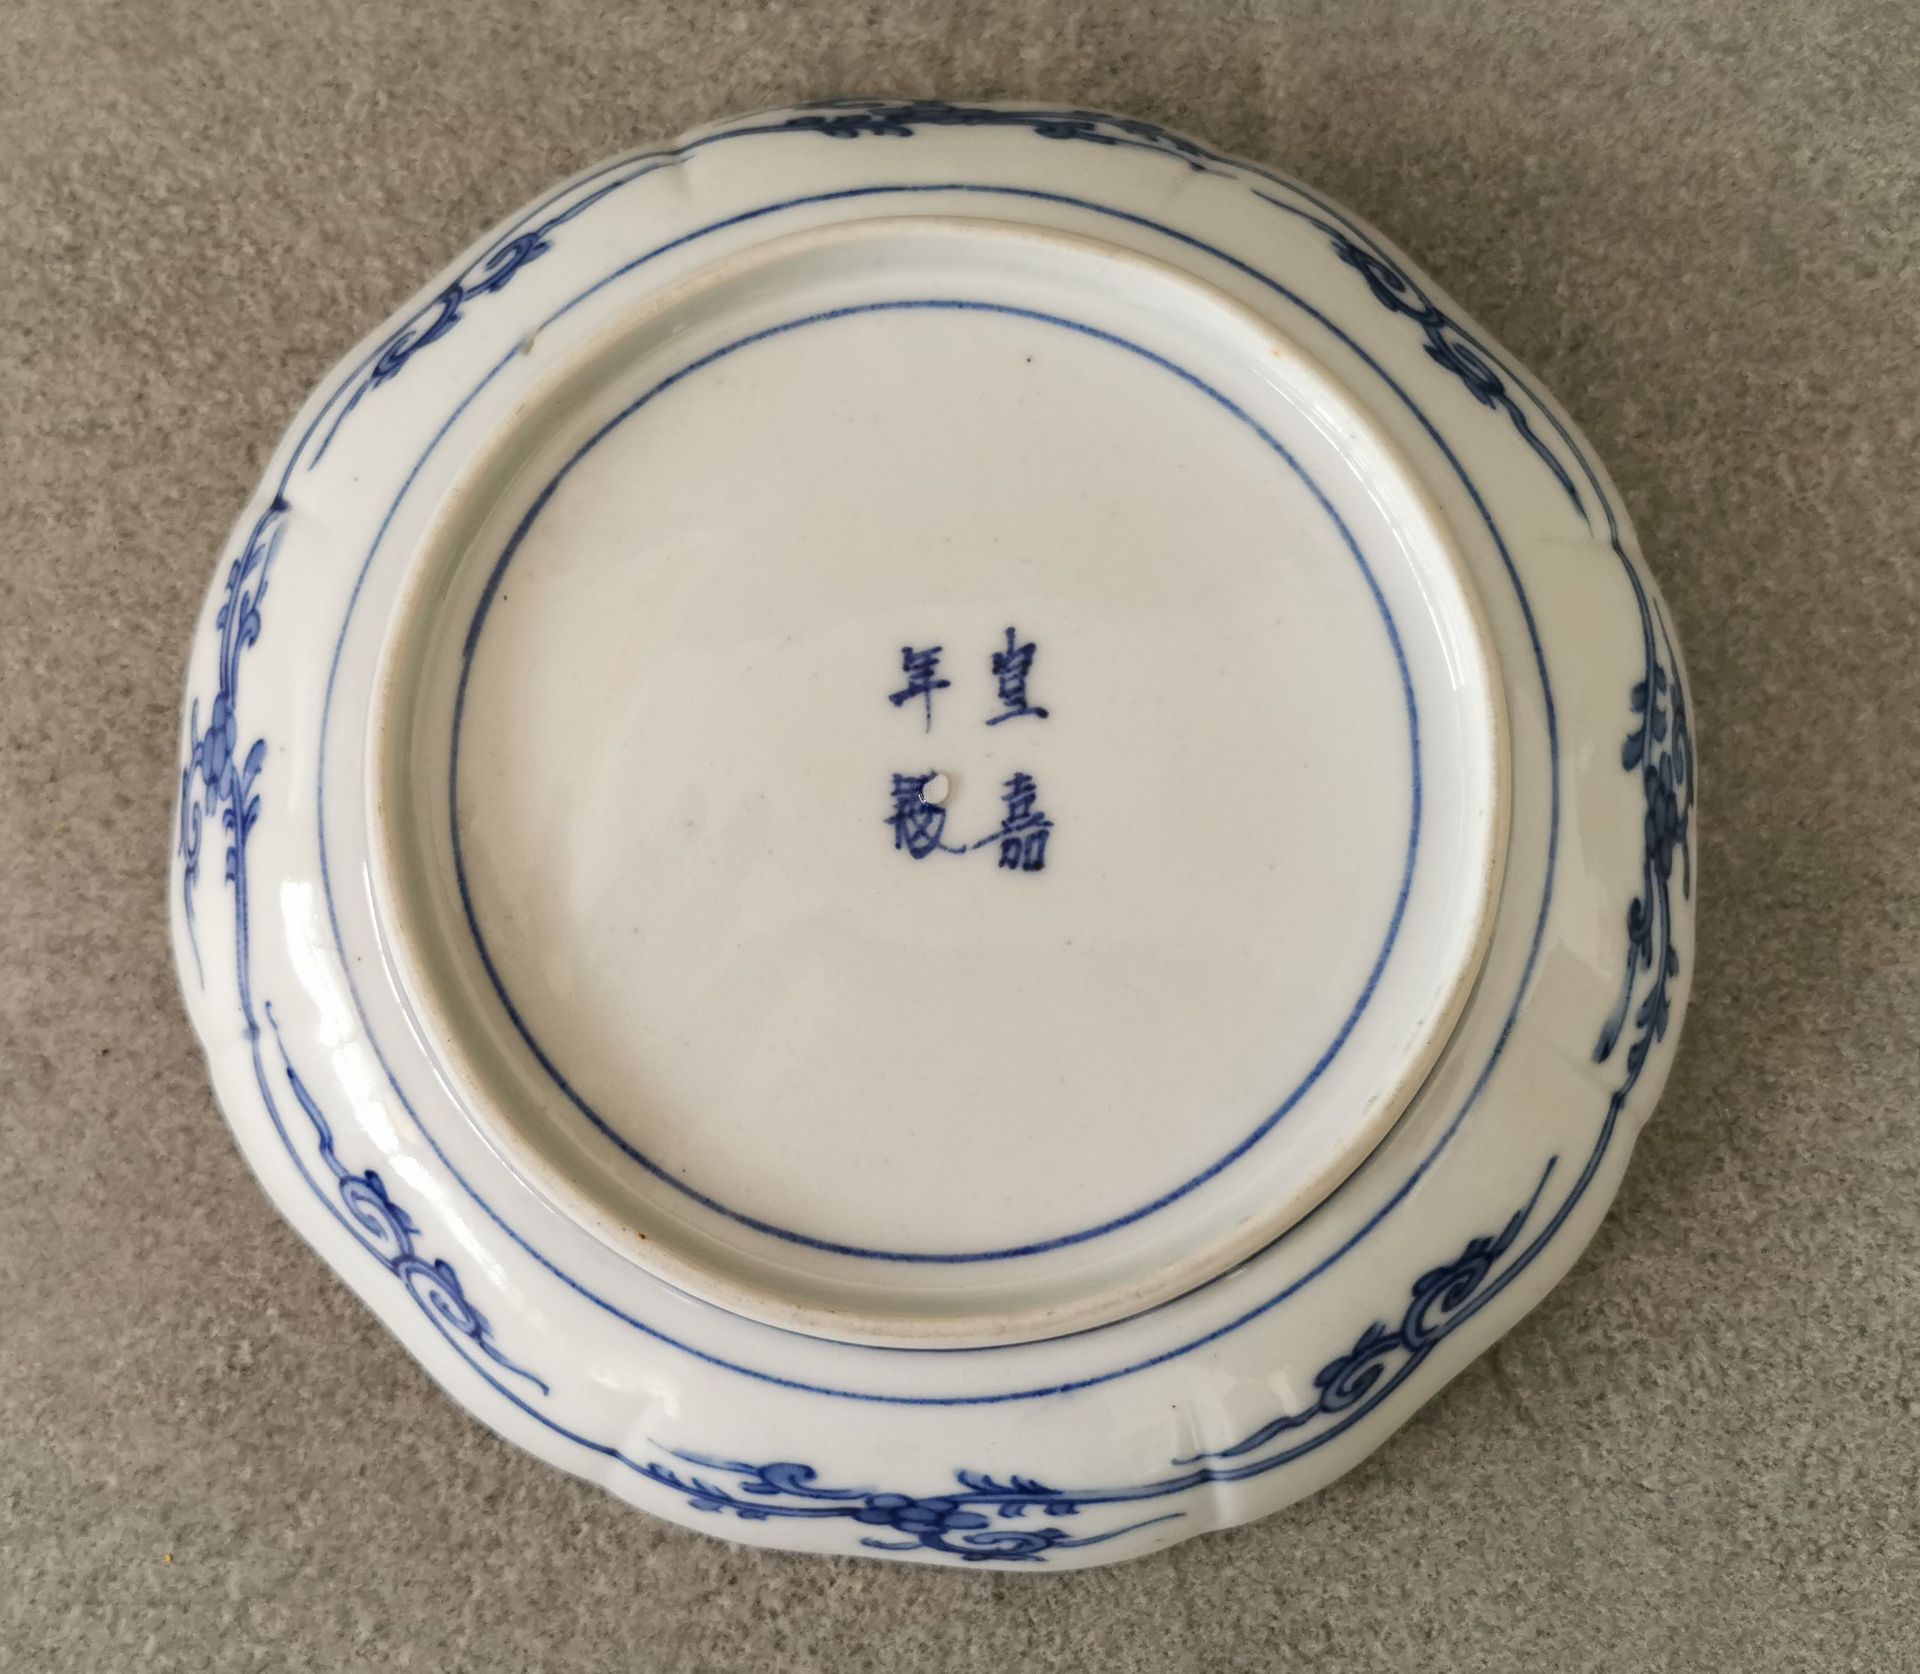 DISH / PLATE - Image 3 of 3